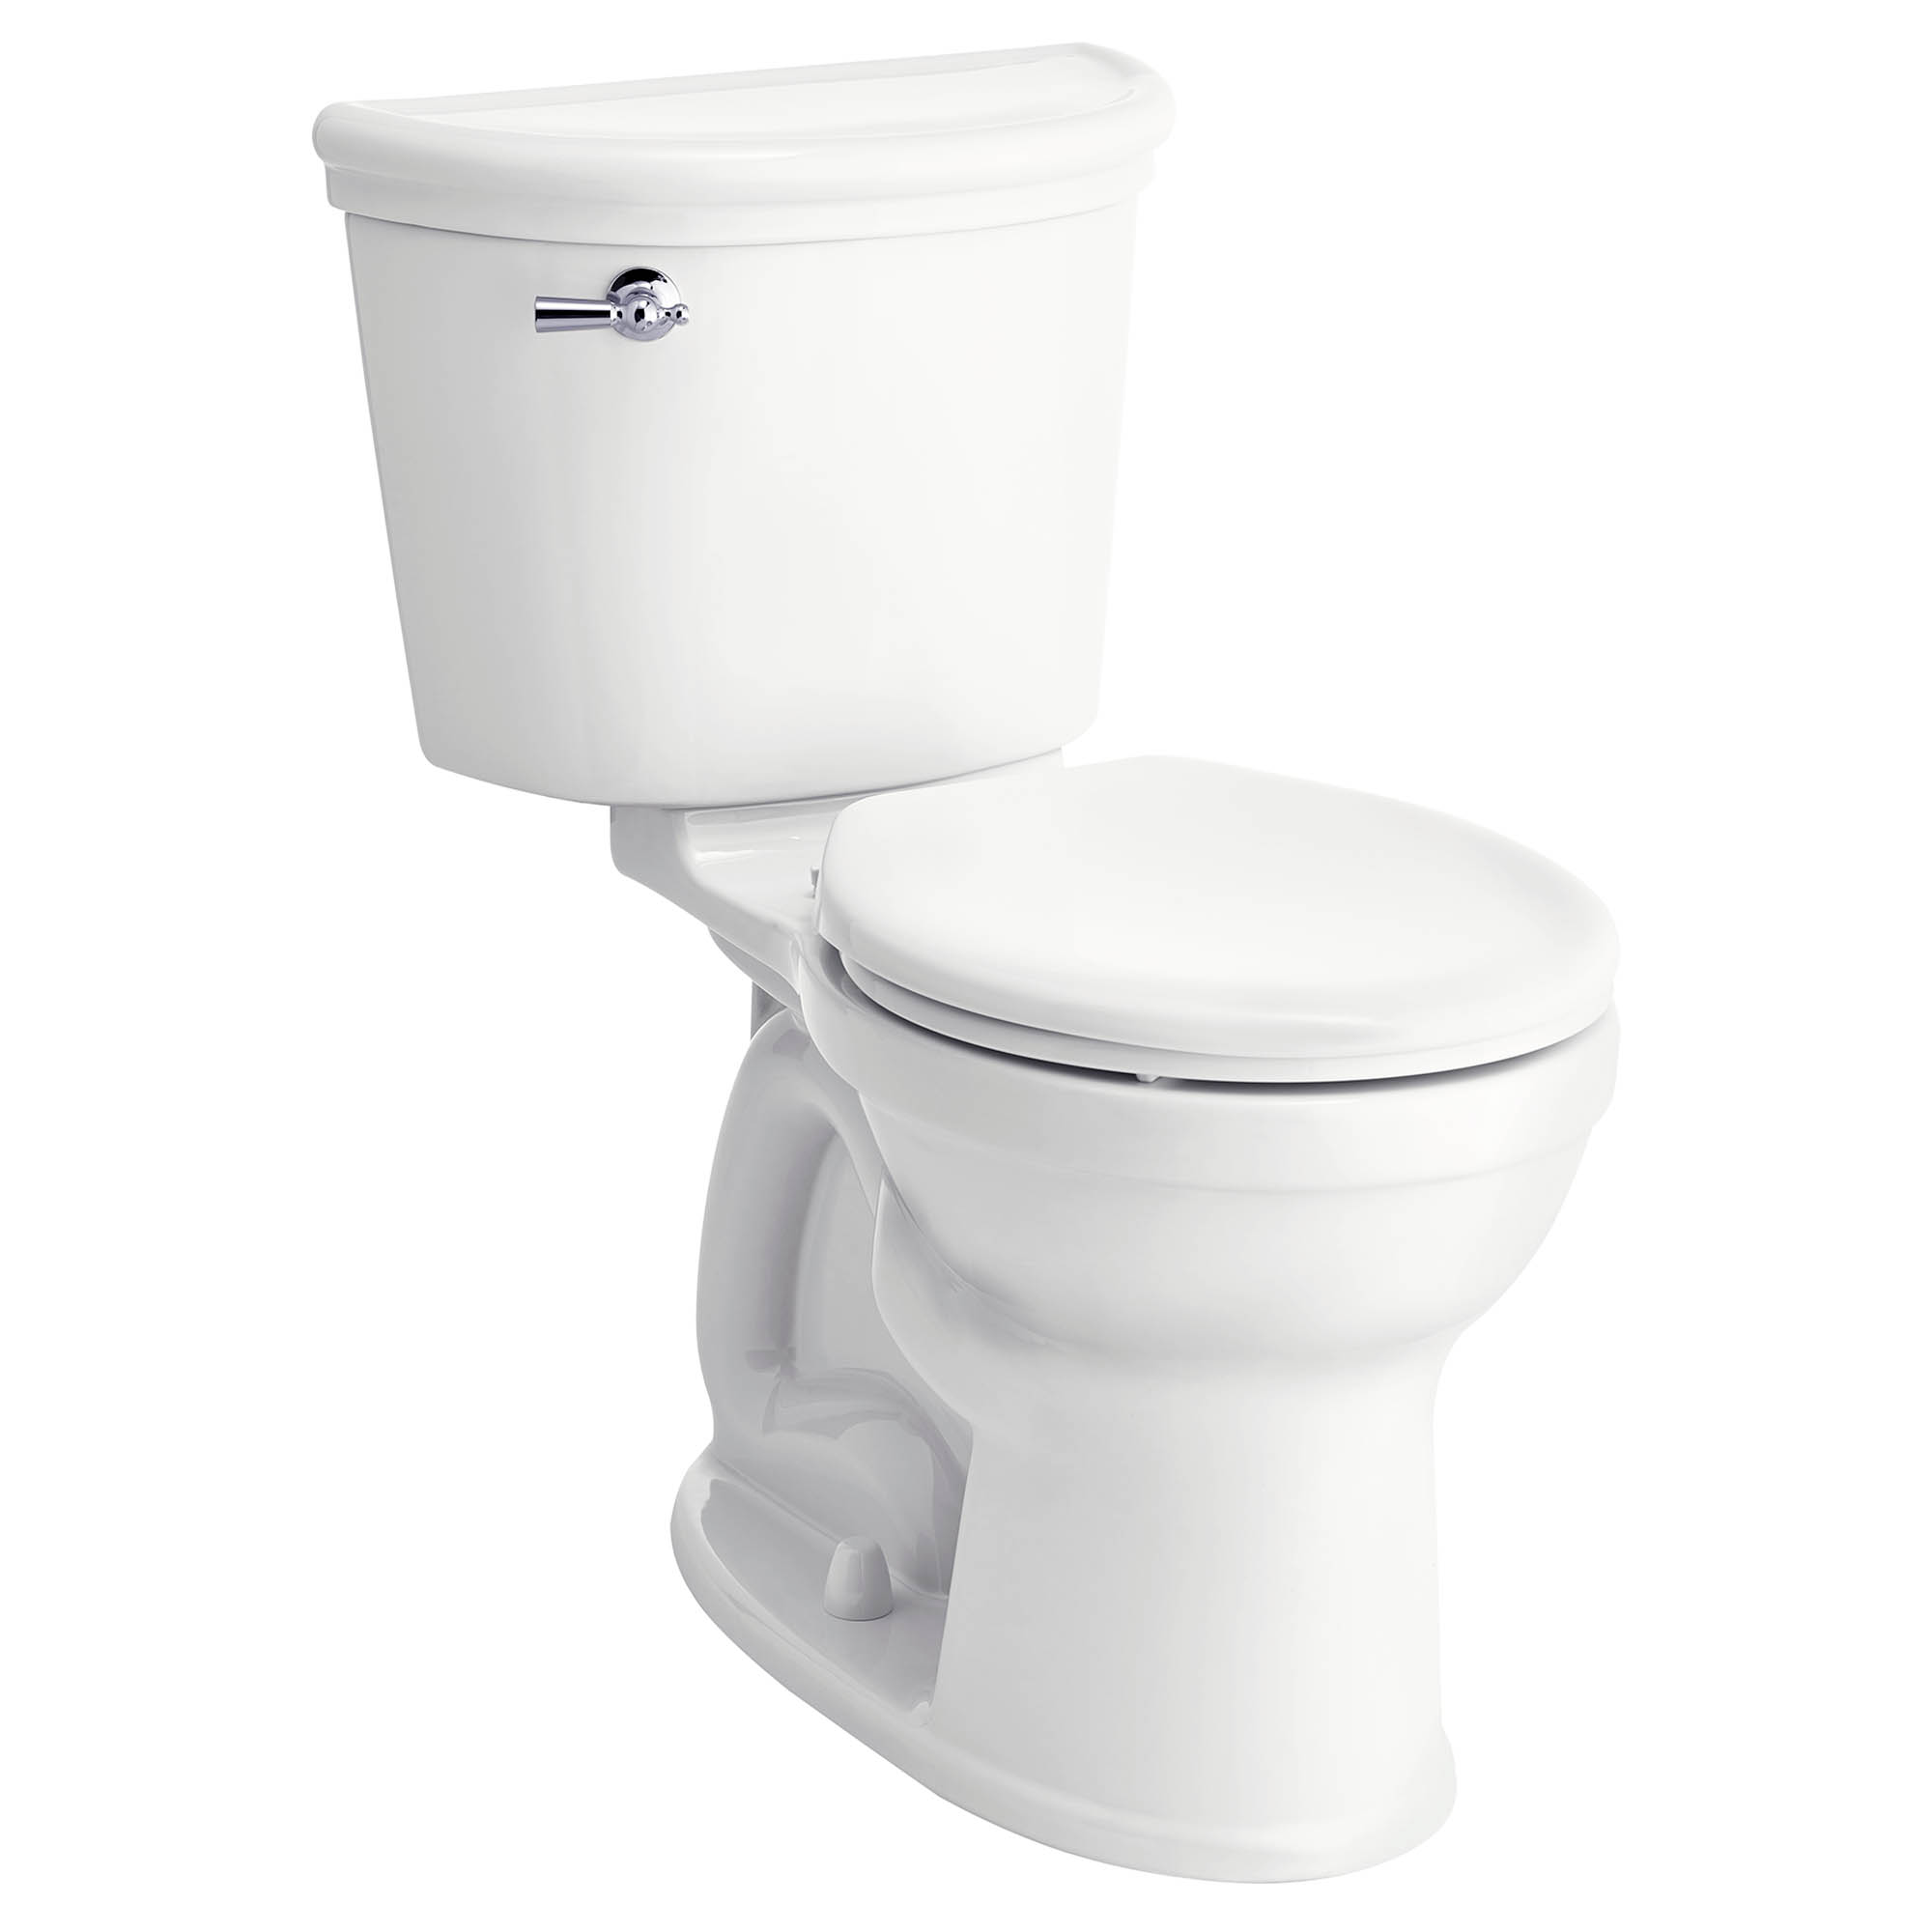 Retrospect® Champion® PRO Two-Piece 1.28 gpf/4.8 Lpf Chair Height Round Front Toilet